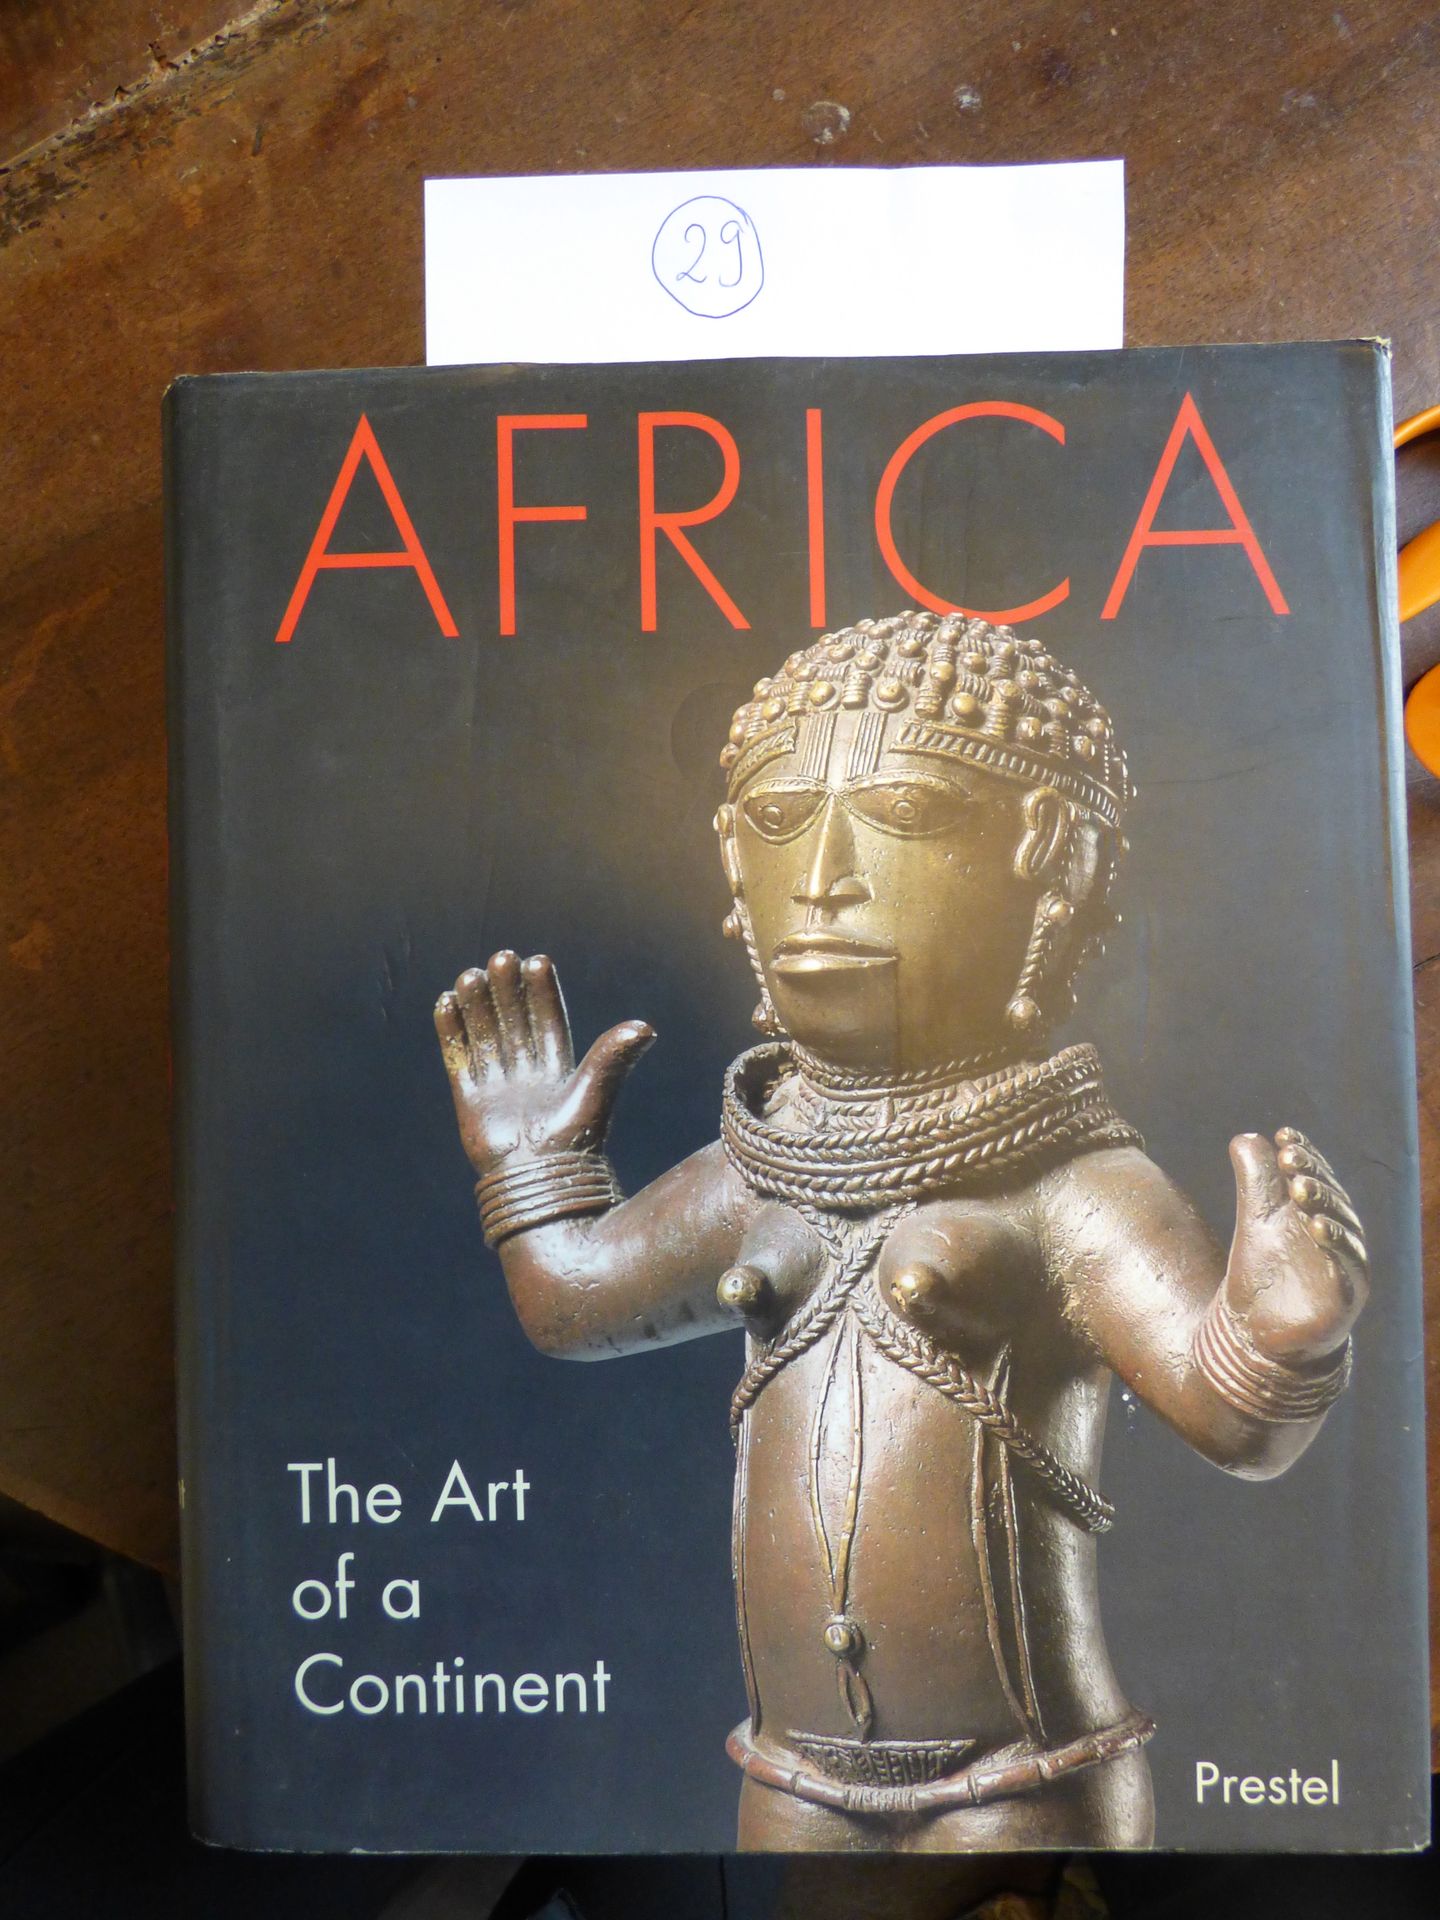 Africa: The Art of a Continent Tom Phillips, Prestel, 1995